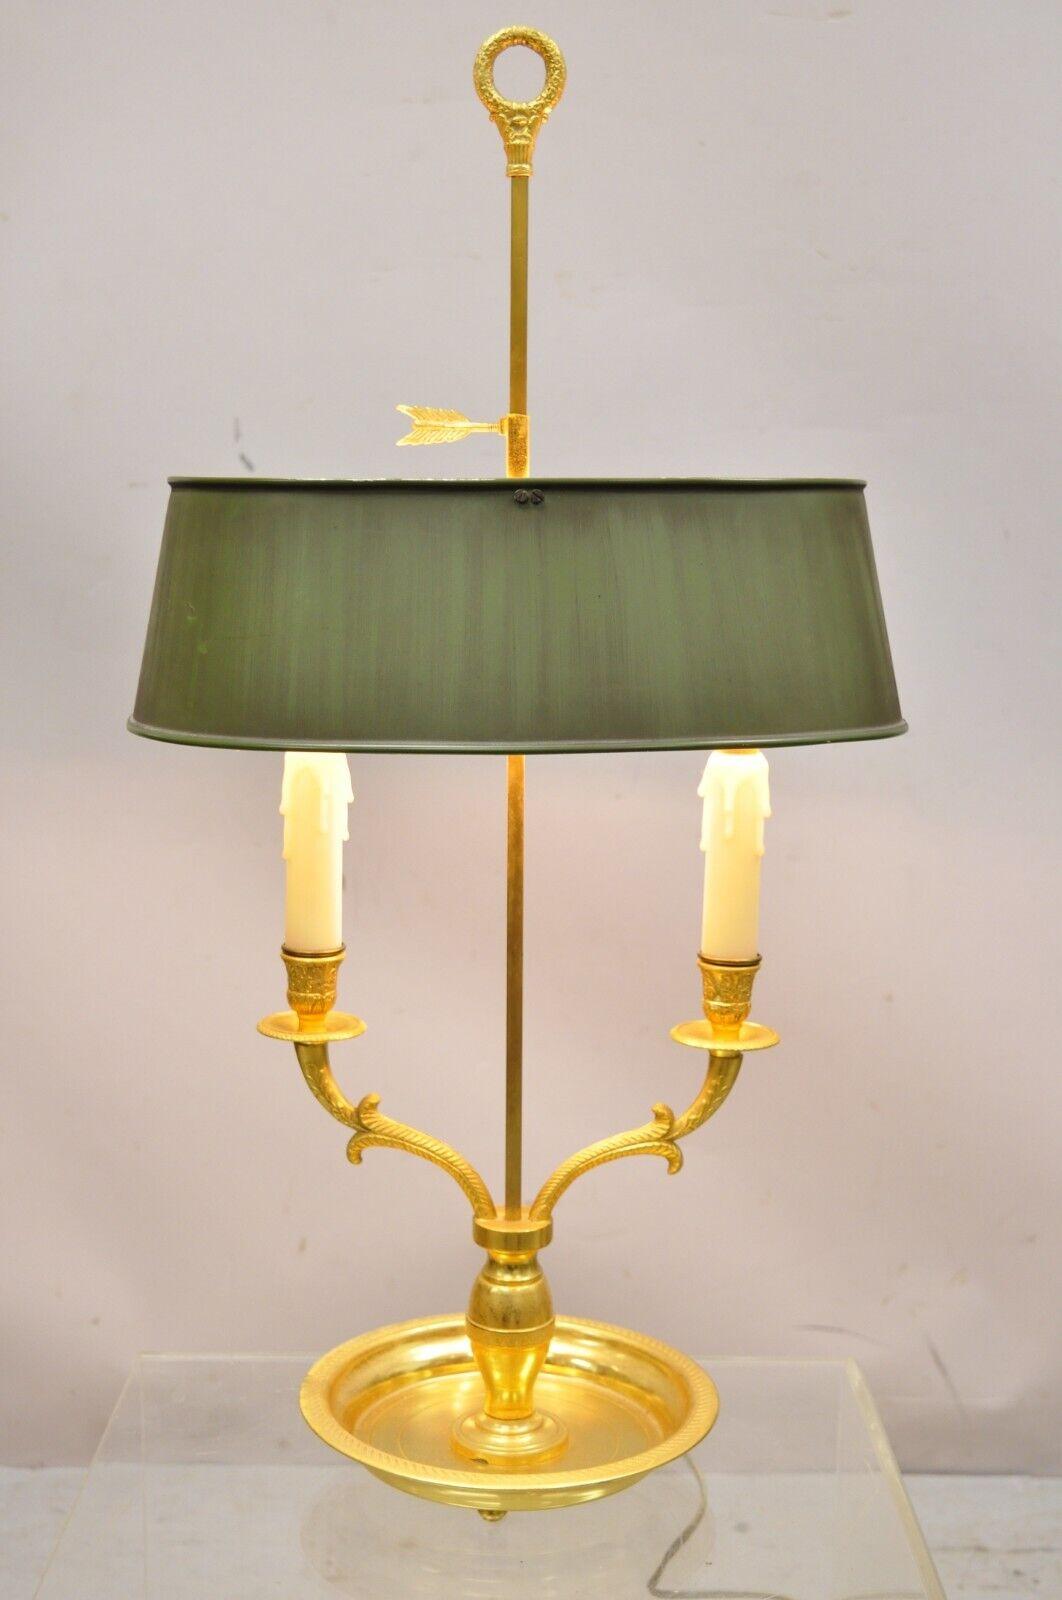 Vintage French empire gold bronze bouillotte desk lamp with green tole metal shade. Item features a bronze french frame, twin light sockets, adjustable height green tole metal shade, very nice vintage item, great style and form. Circa mid-20th